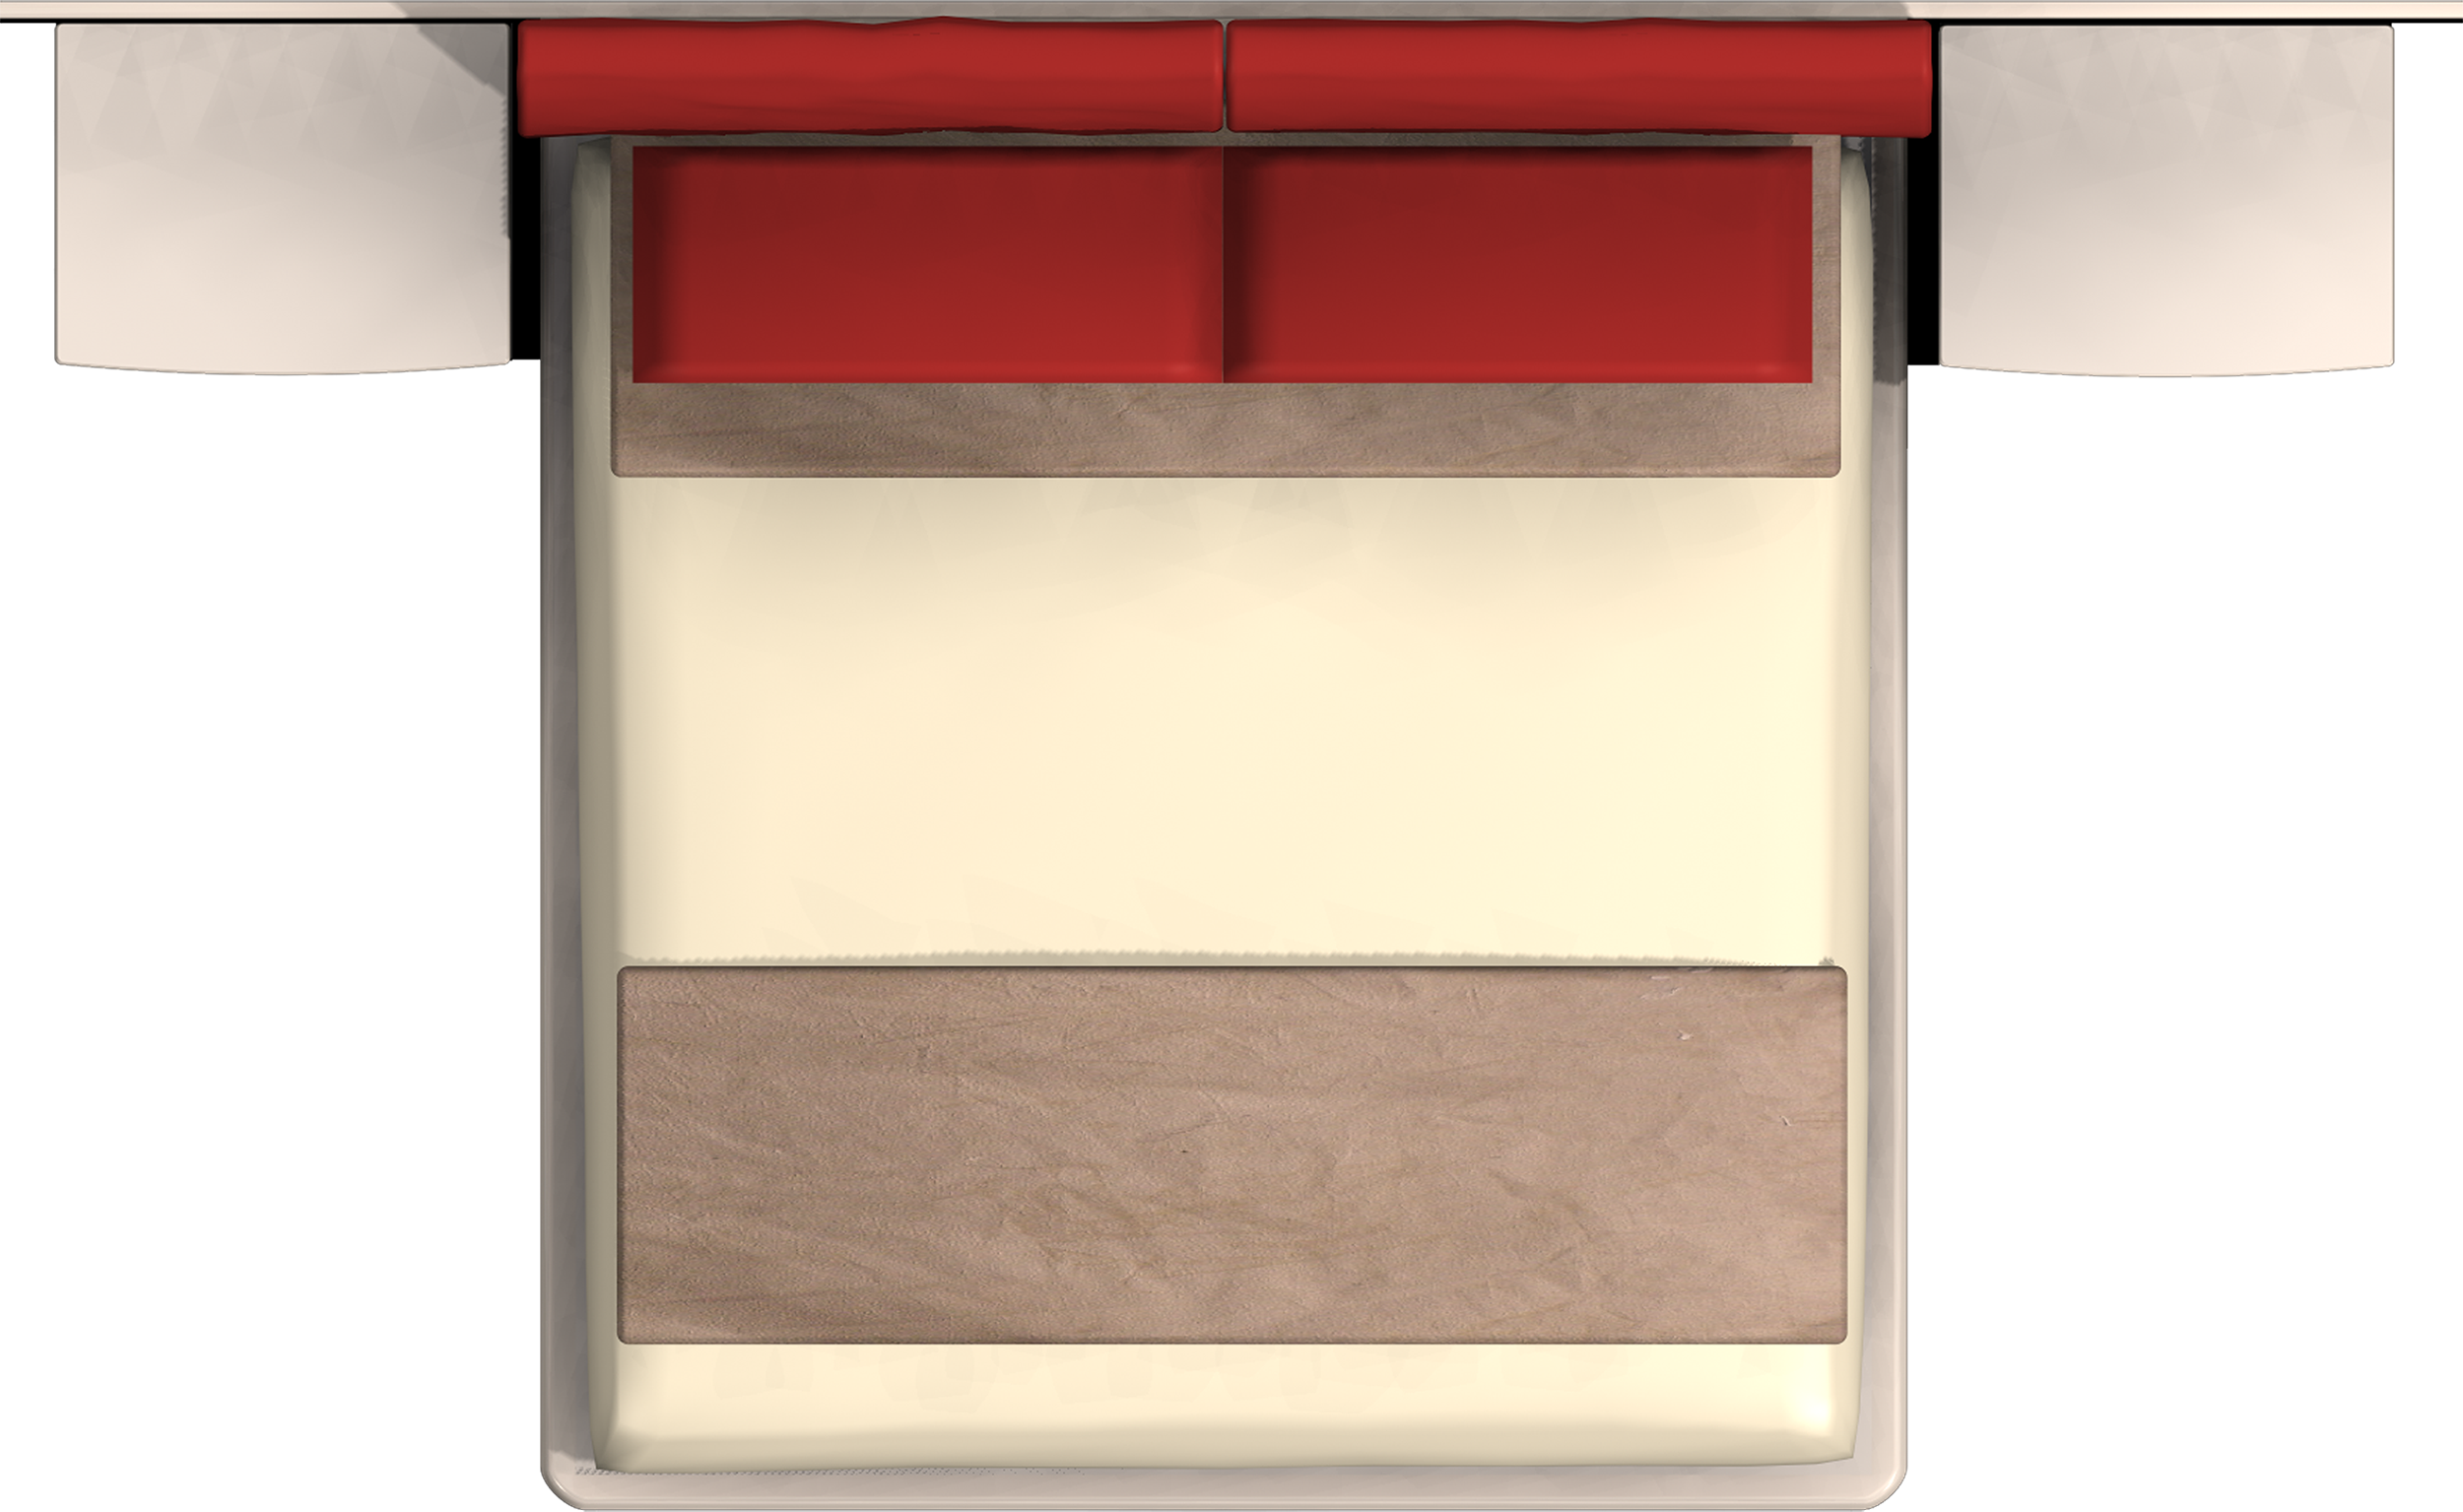 Clipart bed rectangle. Png images free download